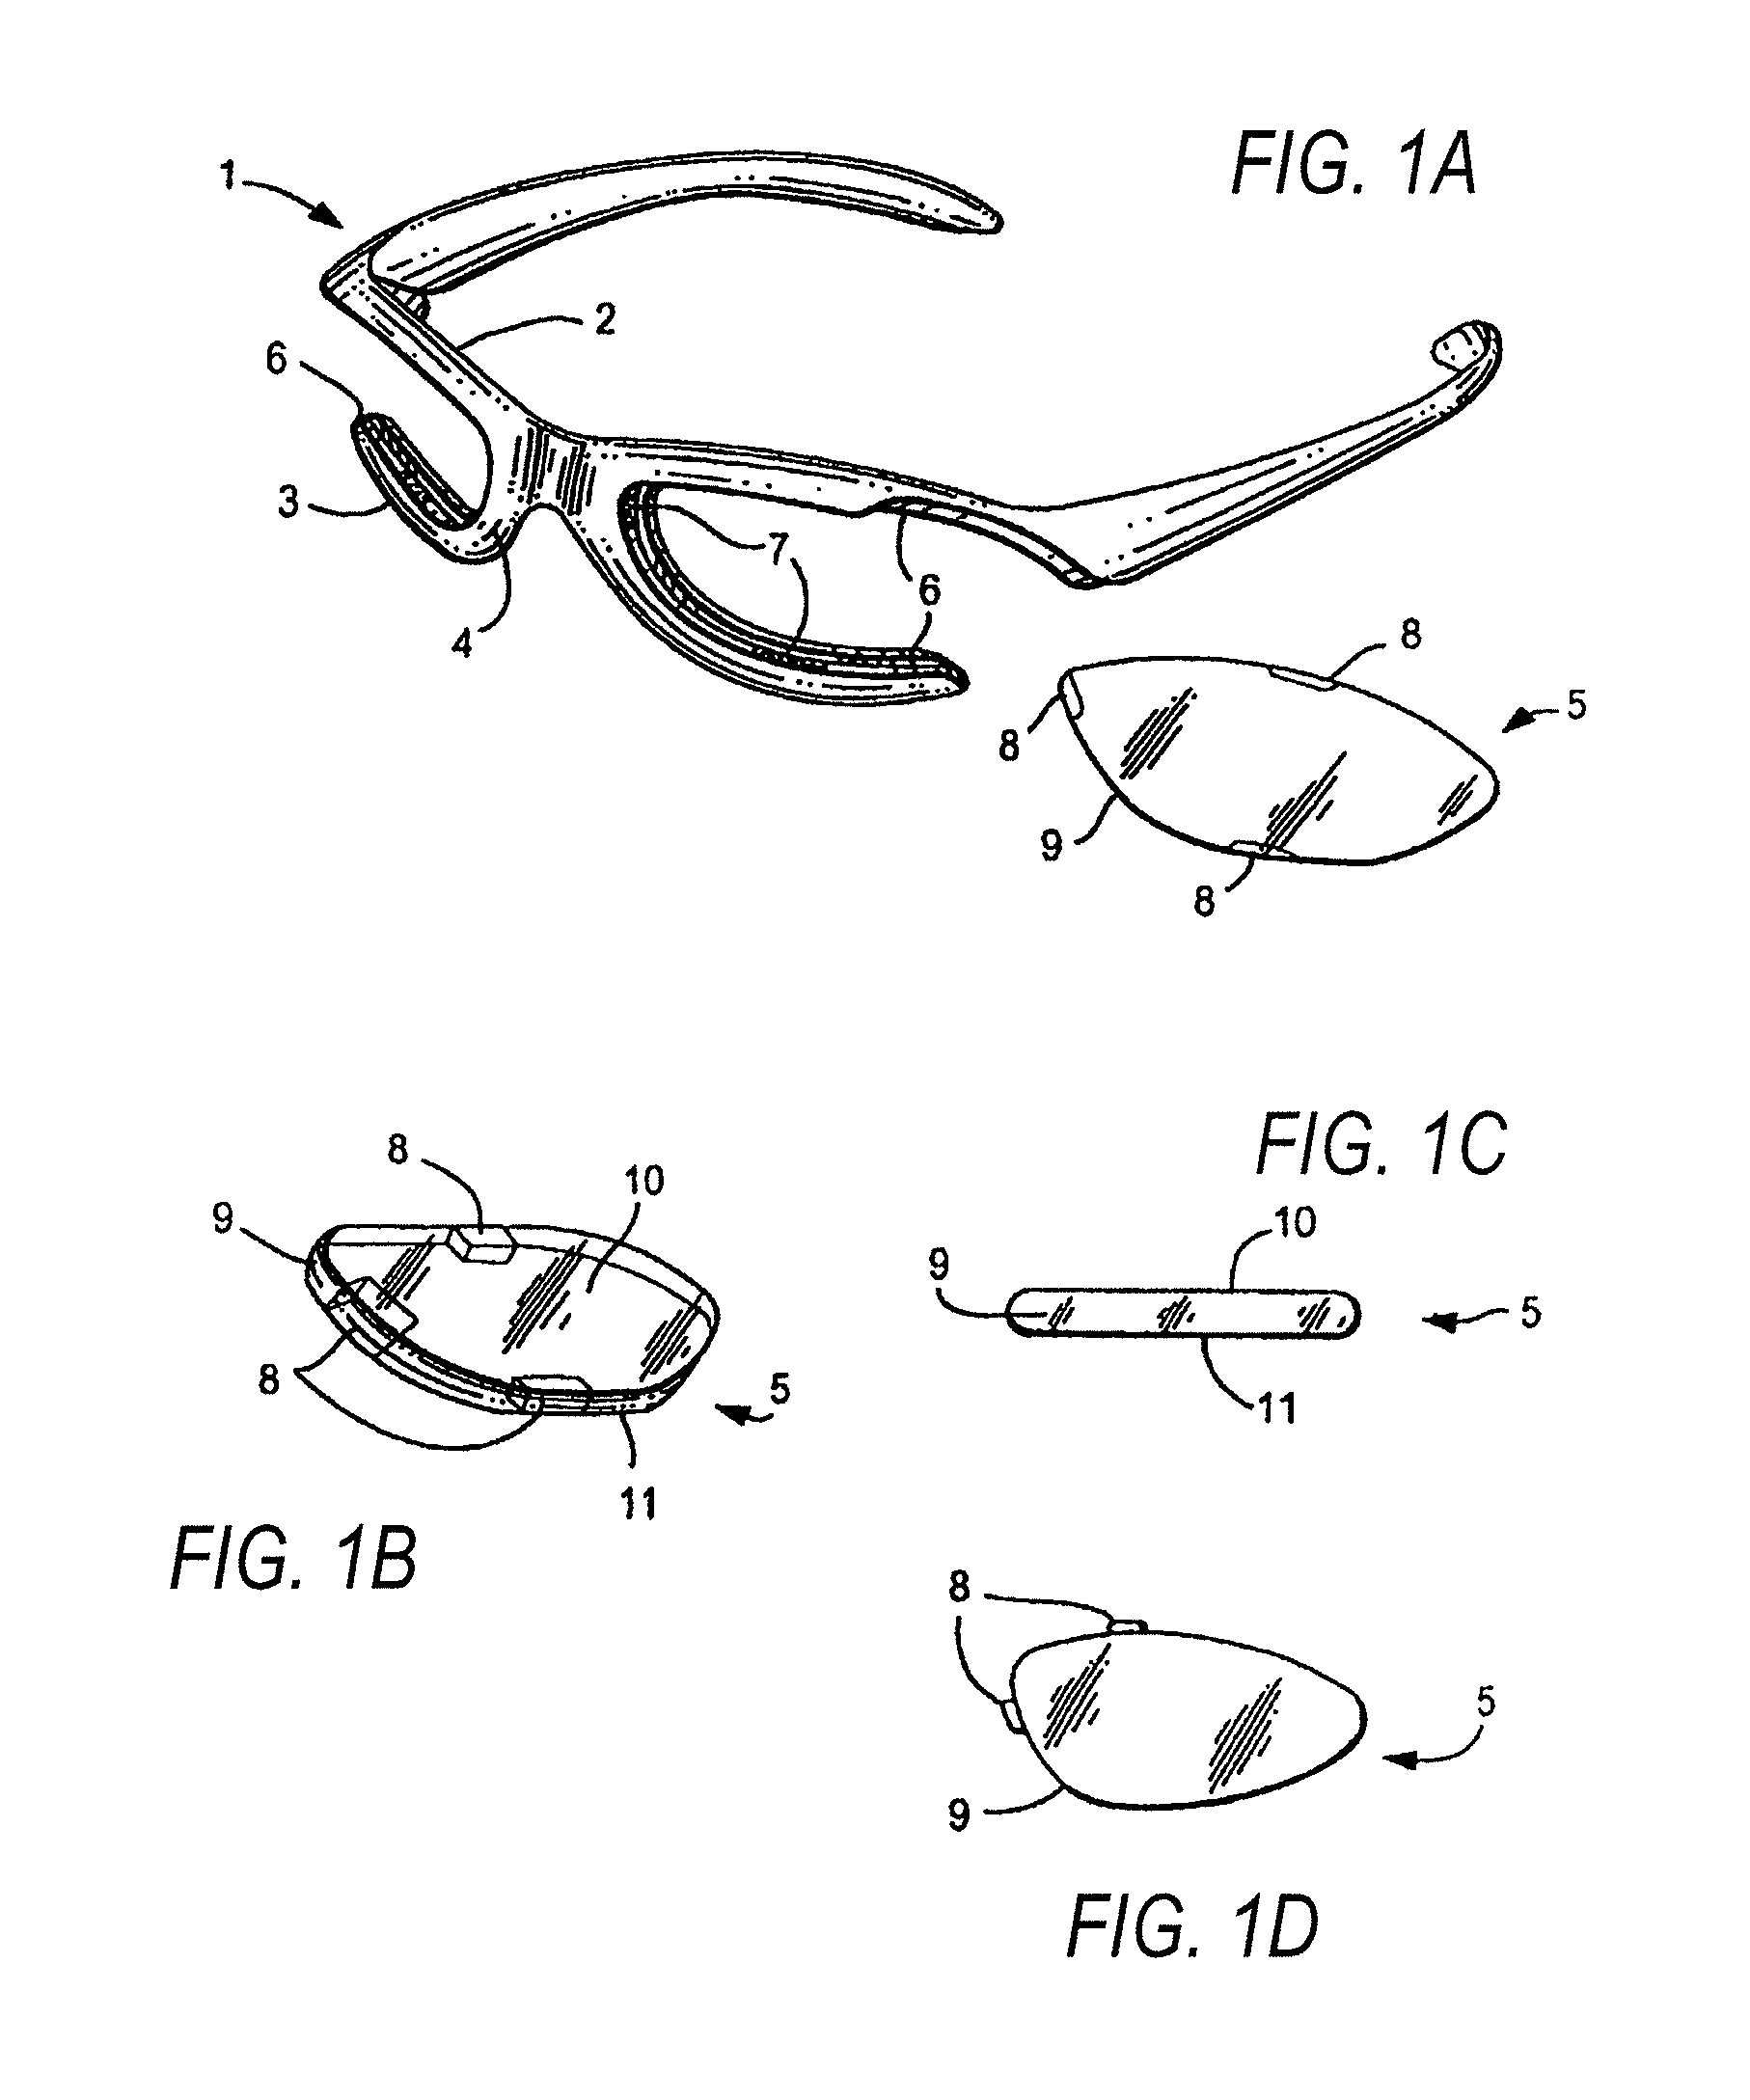 Eyewear frames with magnetic lens attachments